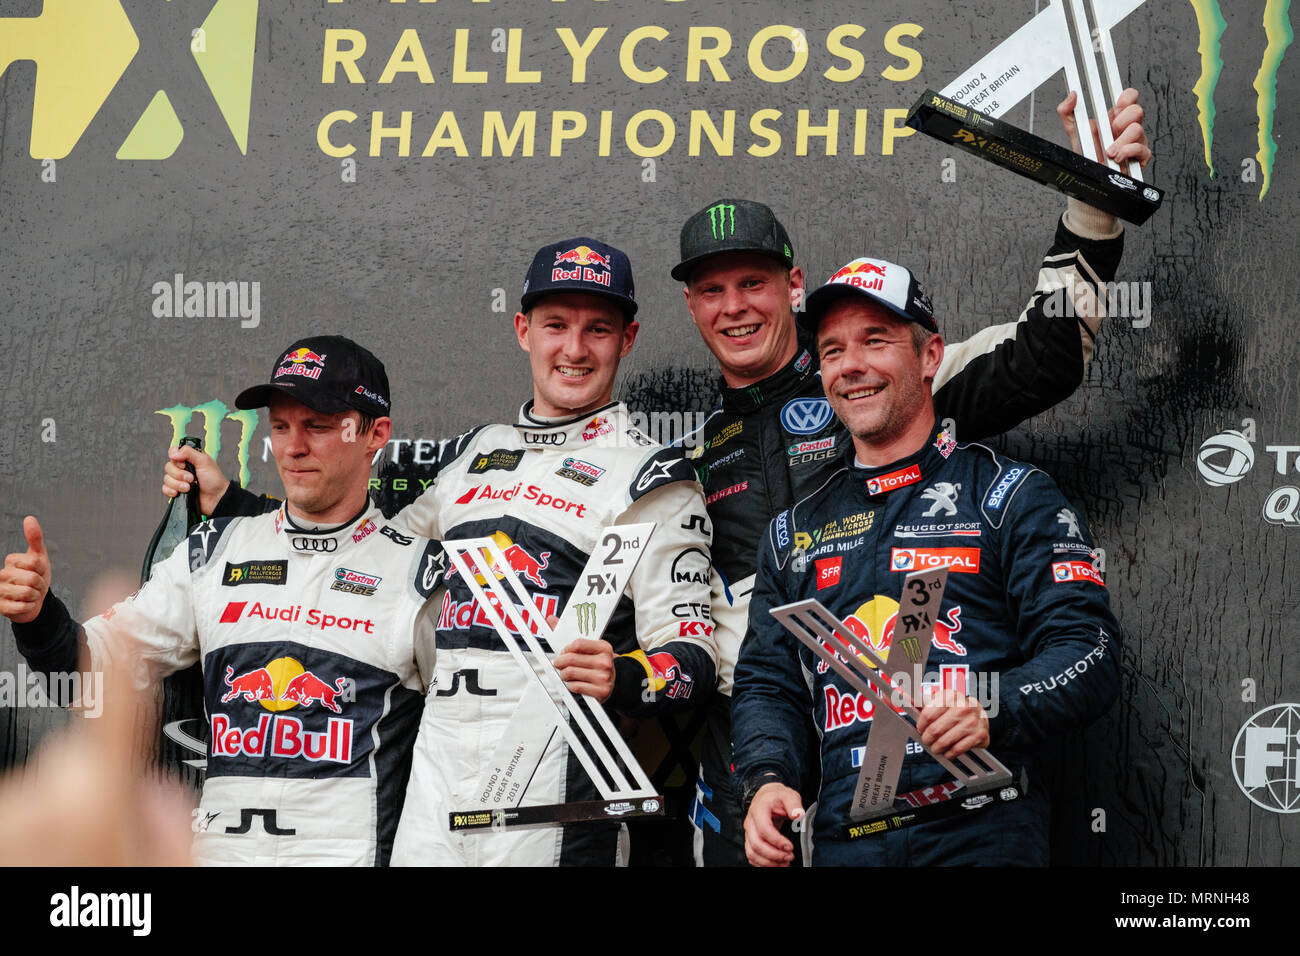 Towcester, Northamptonshire, UK. 27th May, 2018. FIA World Rallycross drivers' podium (Left to Right) Mattias Ekstrom (SWE), Andreas Bakkerud (NOR), Johan Kristoffersson (SWE) and Sebastien Loeb (FRA) on the podium of the Cooper Tires World RX of Great Britain at Silverstone (Photo by Gergo Toth / Alamy Live News) Stock Photo